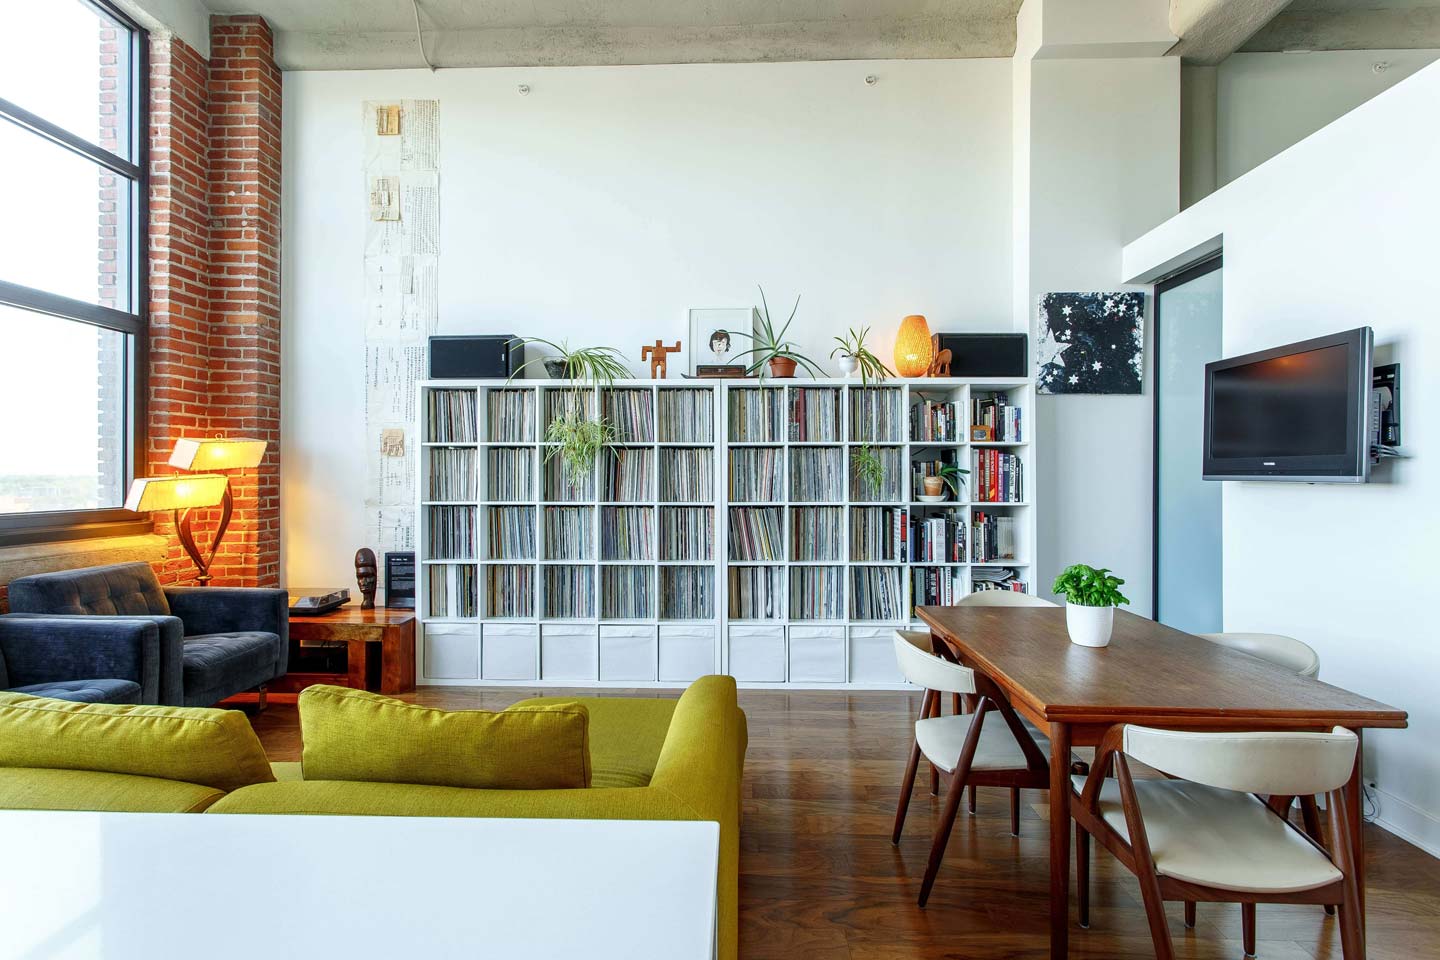 A modern living room with a record collection